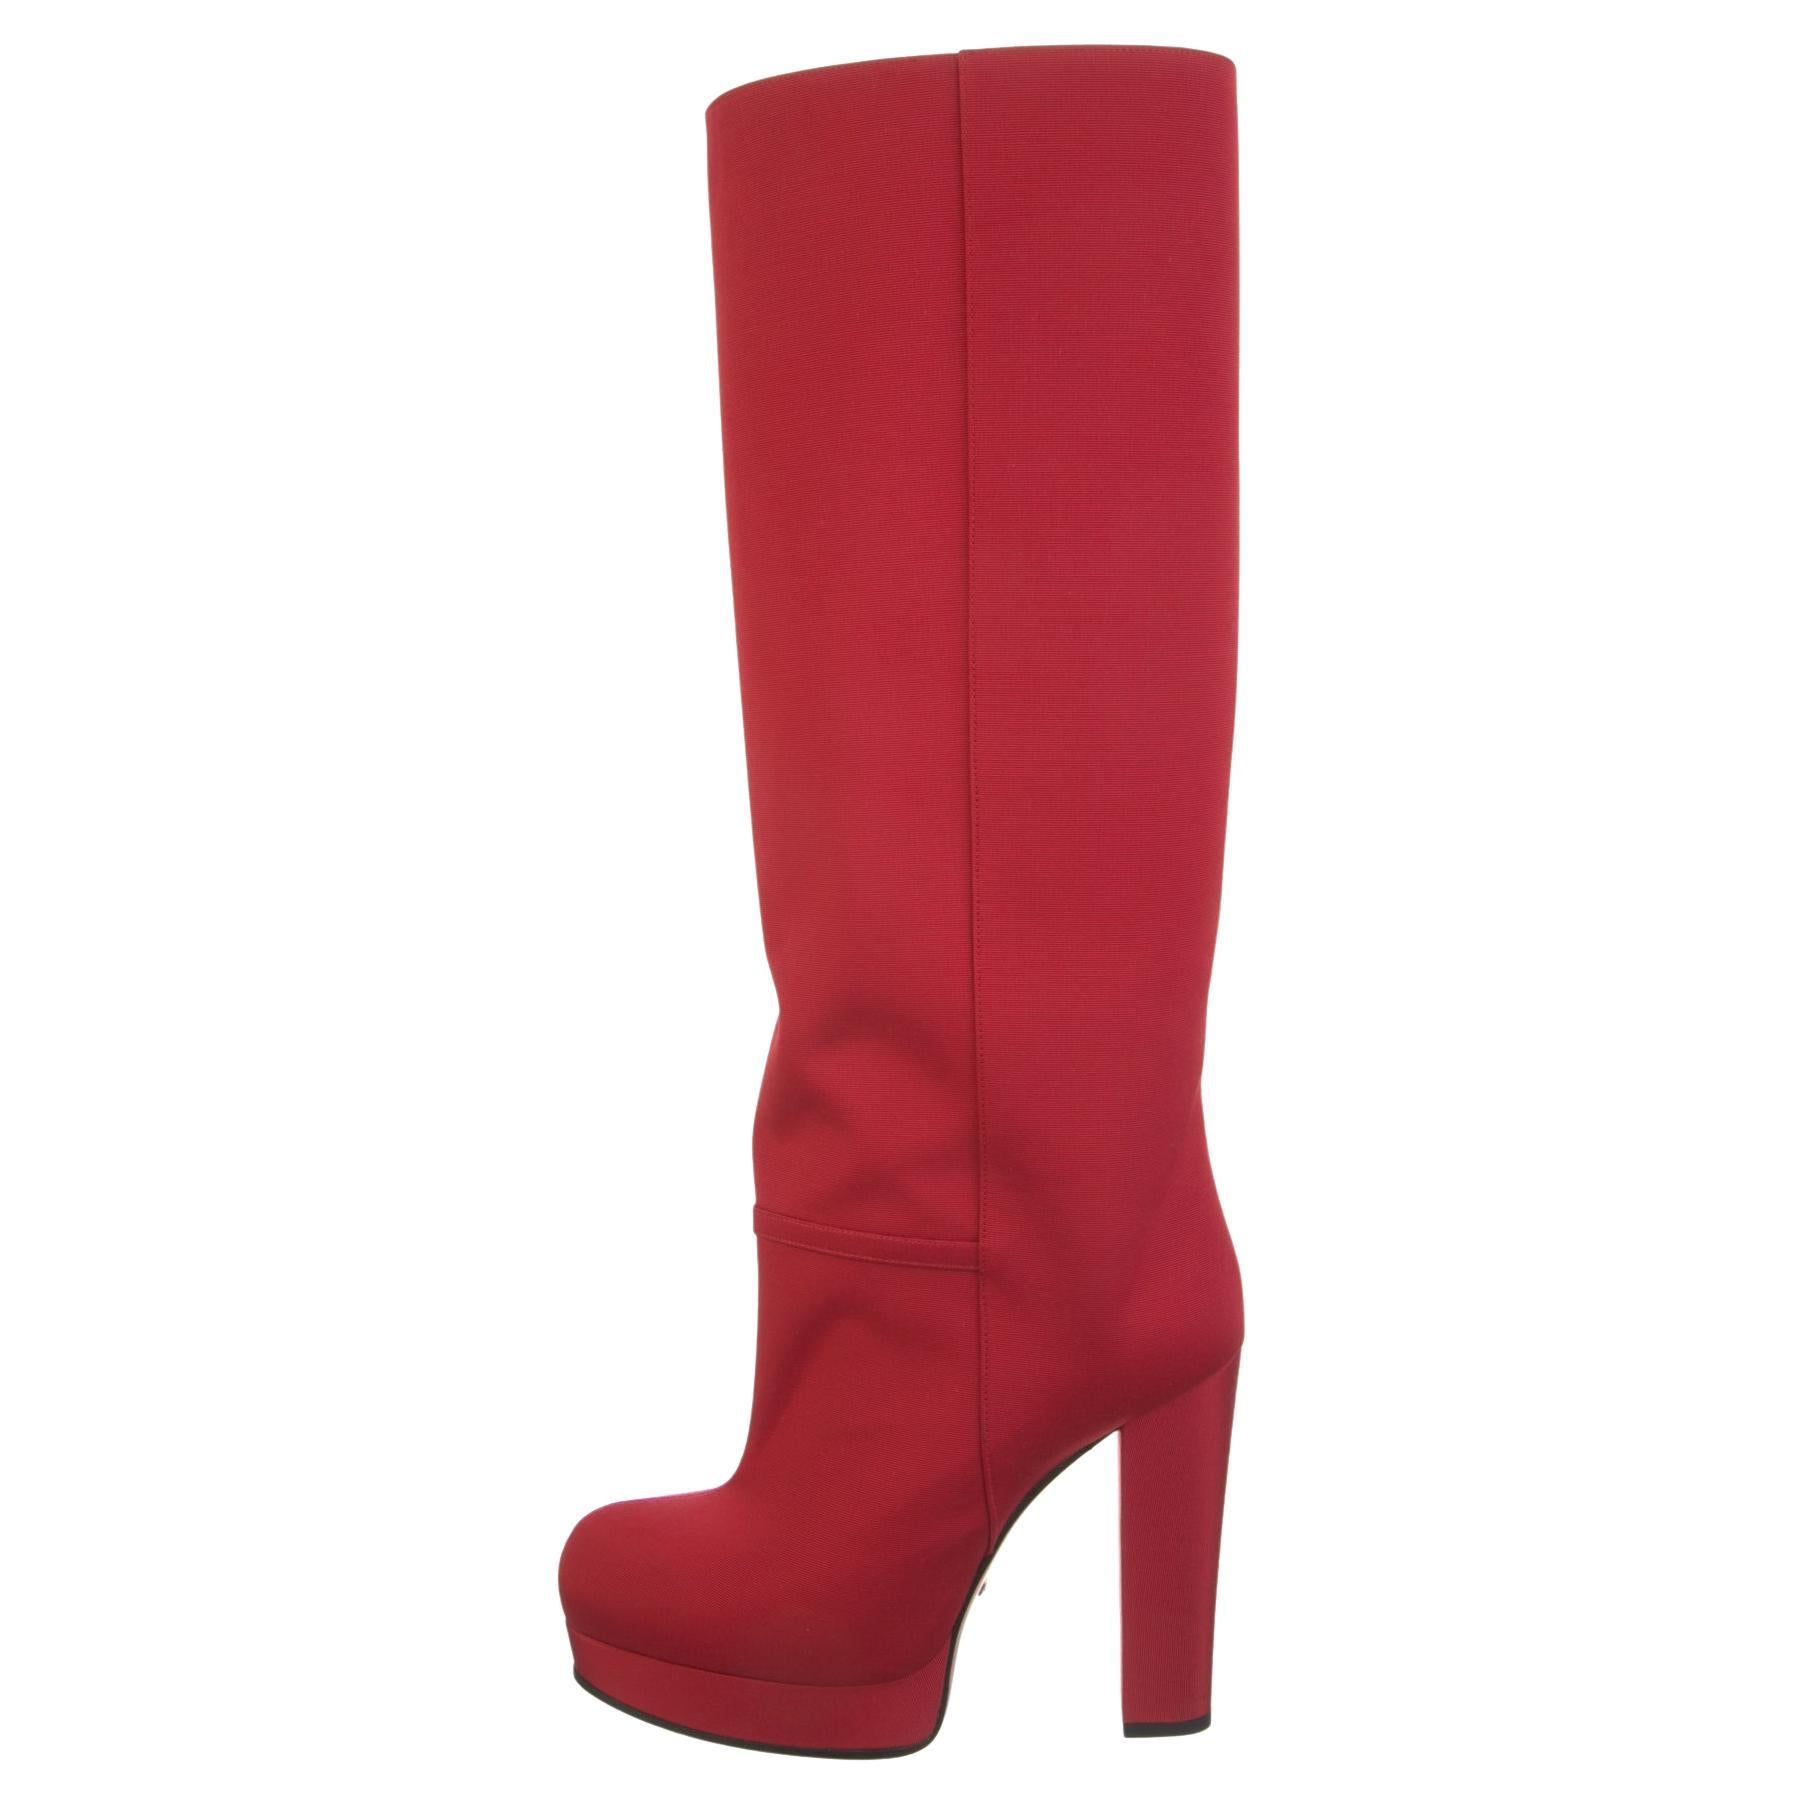 New With Box Gucci Fall 2019 Alessandro Michele Red Boots Sz 36.5 In New Condition In Leesburg, VA